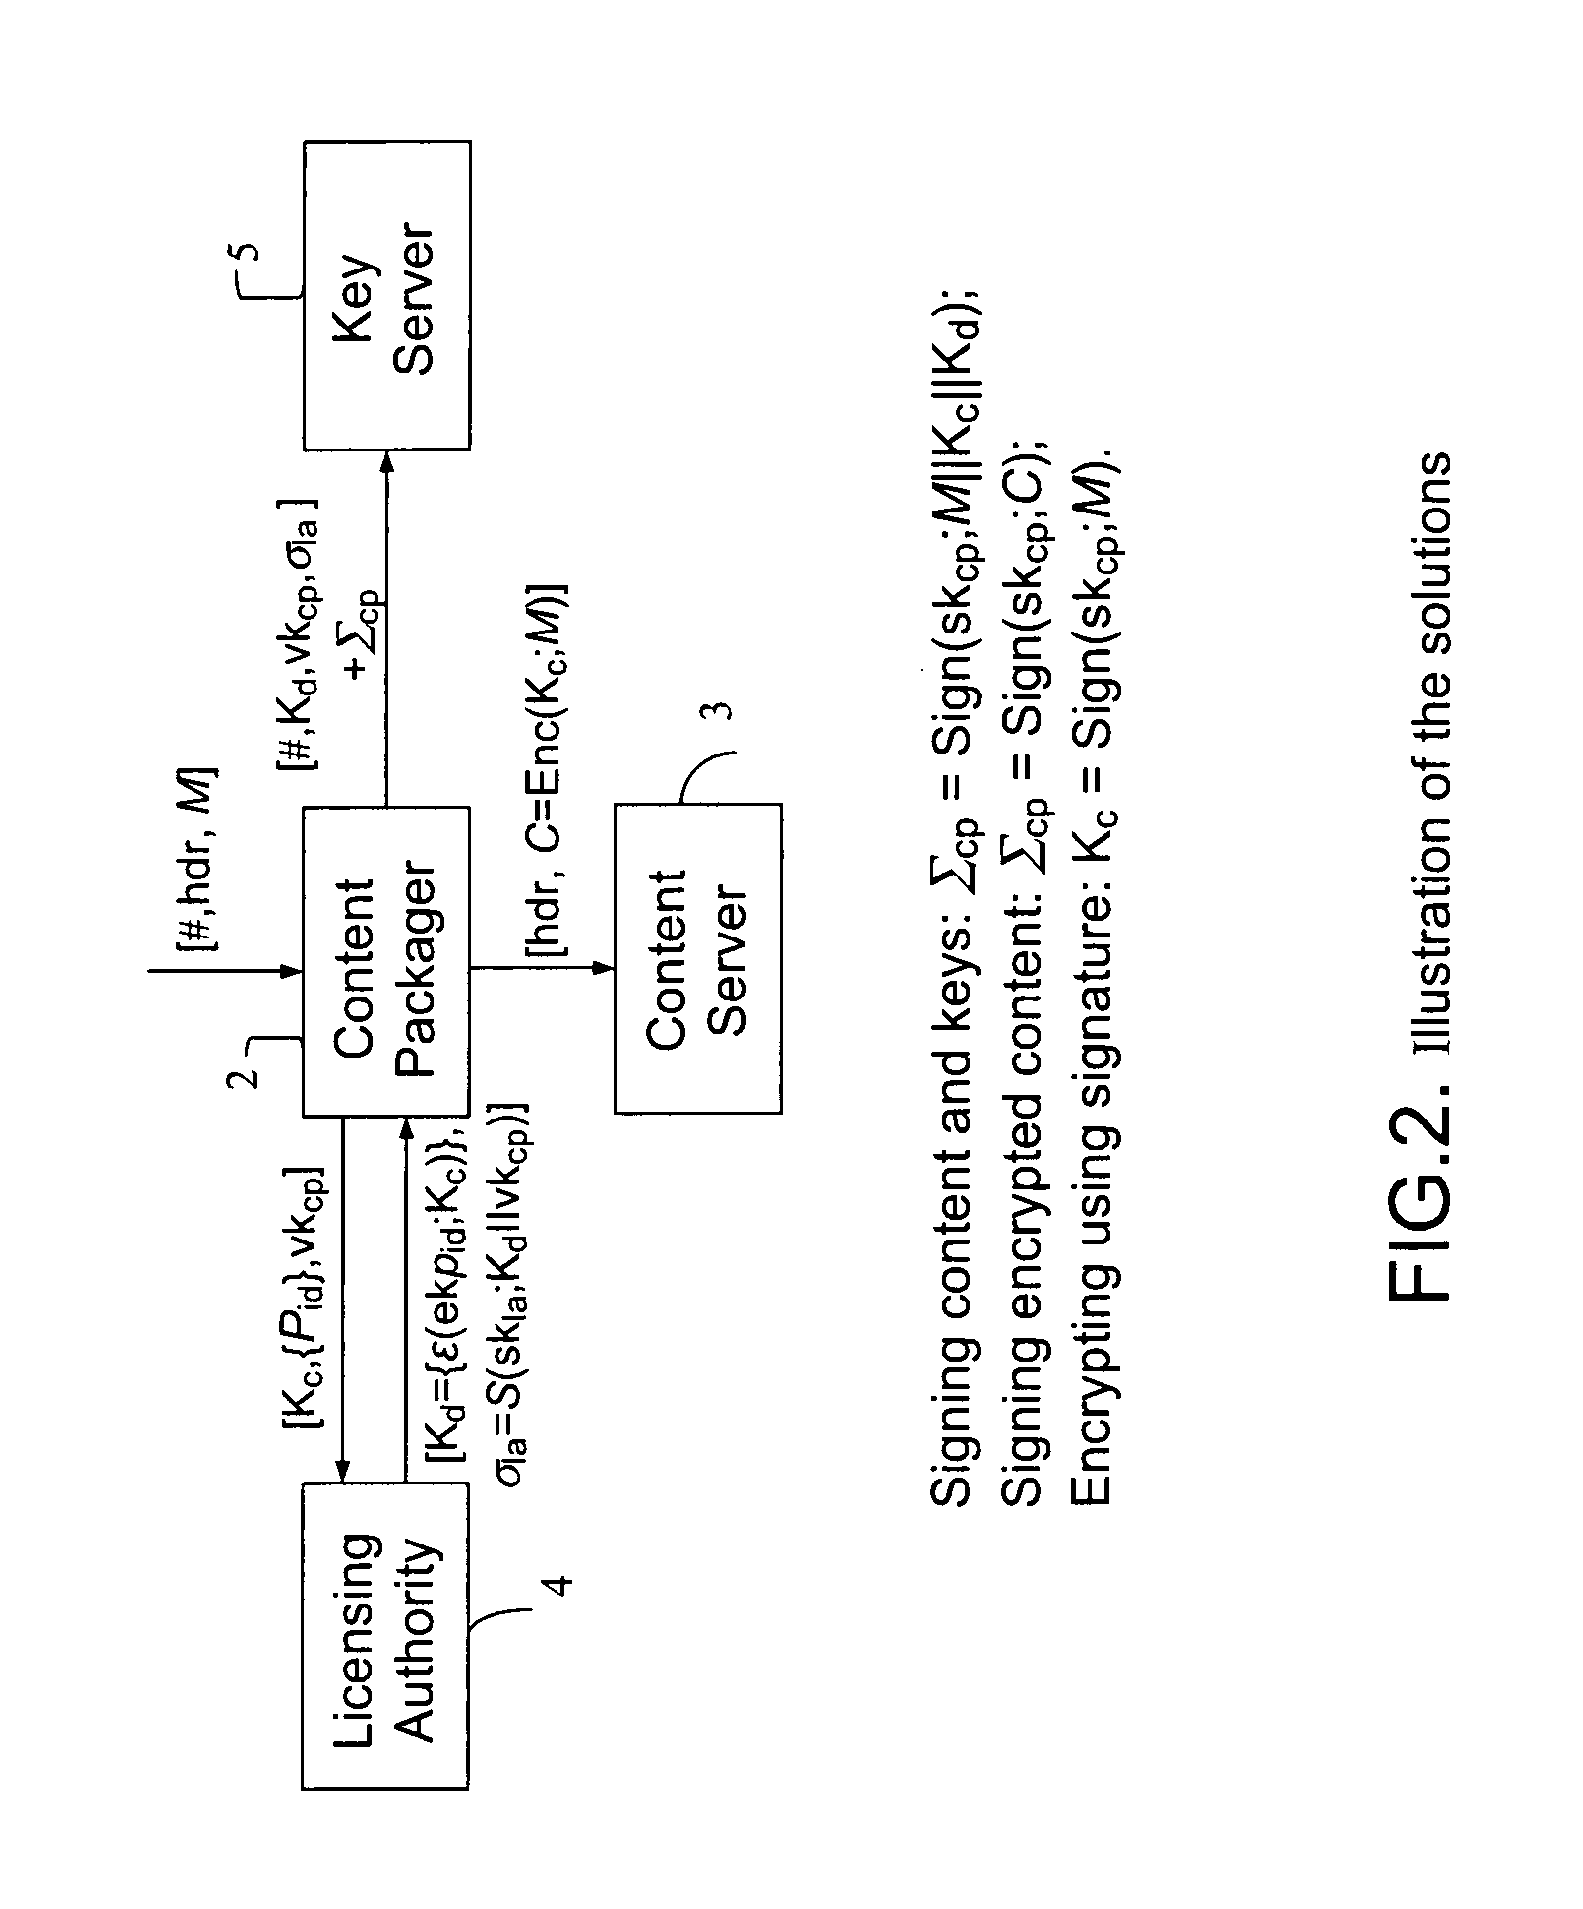 Method for preventing laundering and repackaging of multimedia content in content distribution systems